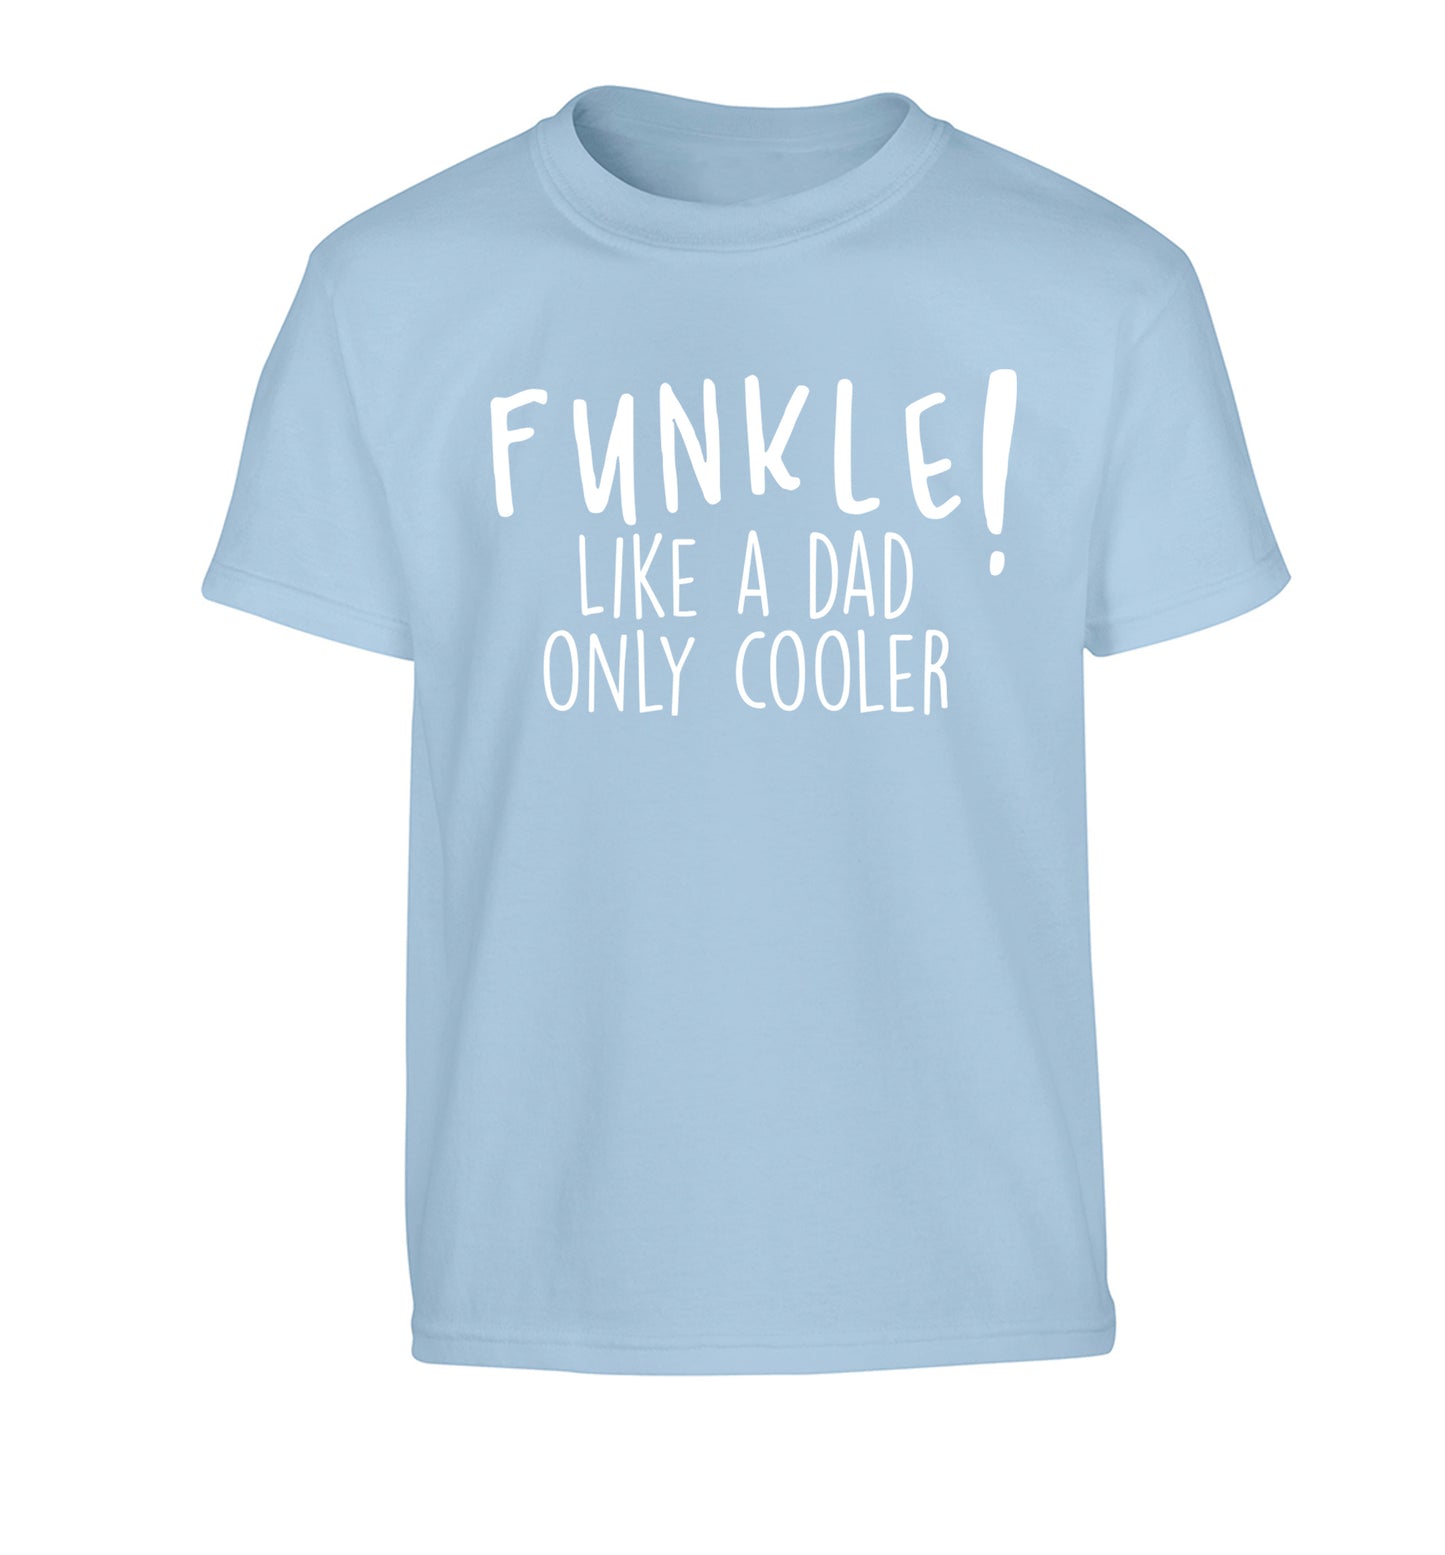 Funkle Like a Dad Only Cooler Children's light blue Tshirt 12-13 Years